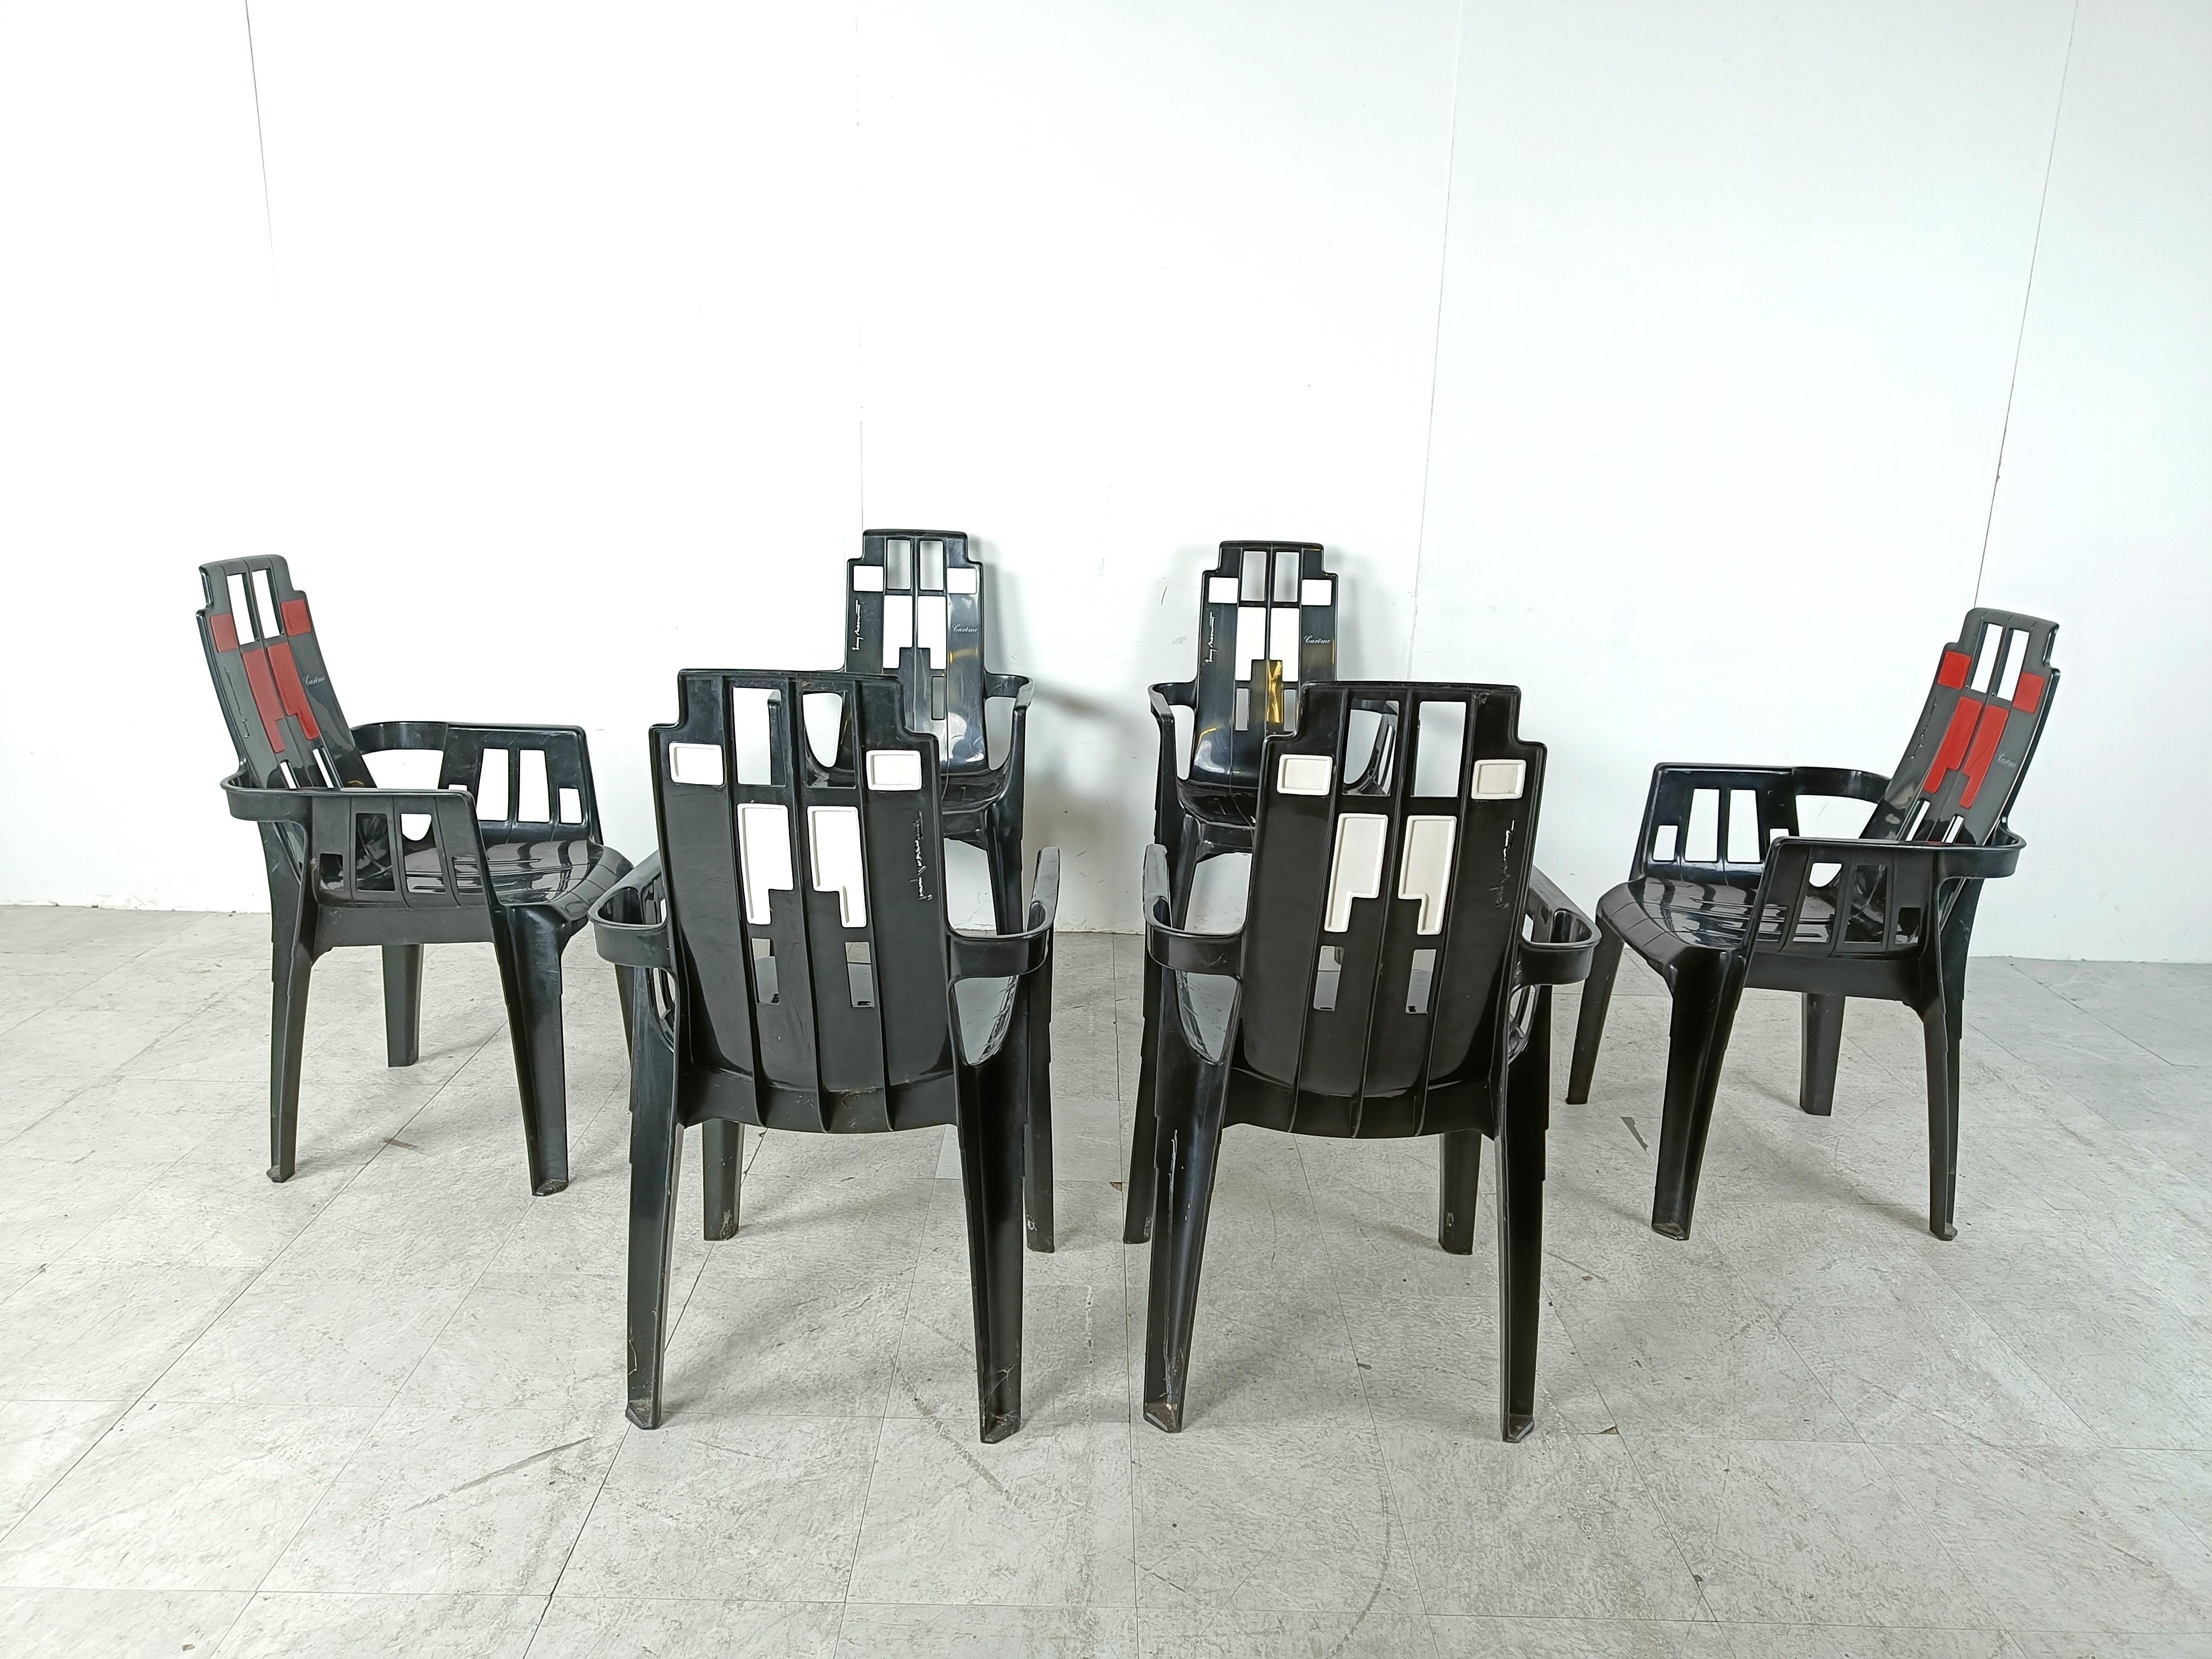 Set of 6 stackable Boston dining chairs by Pierre Paulin inspired by Piet Mondriaan and Charles Rennie Mackintosh.

These dining chairs can be used in and outdoor and have a timeless design

1980s - France

Measurements
Height: 95cm/37.40